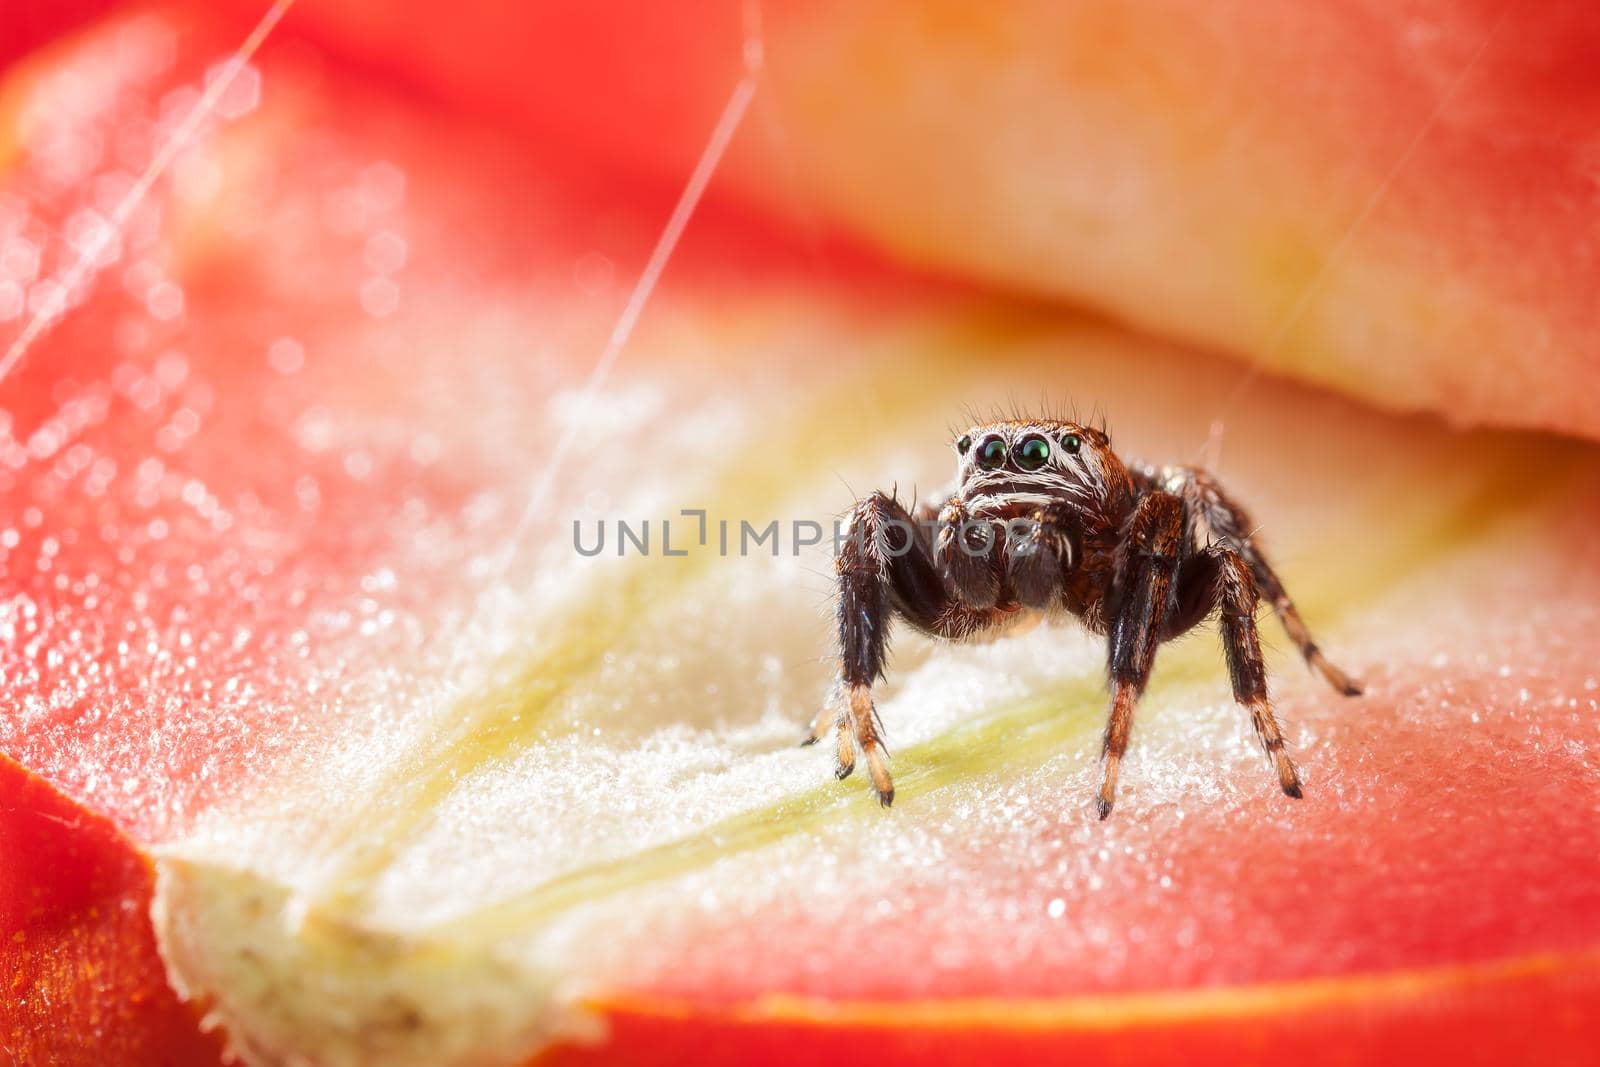 Jumping spider on a red glowing slice of tomato